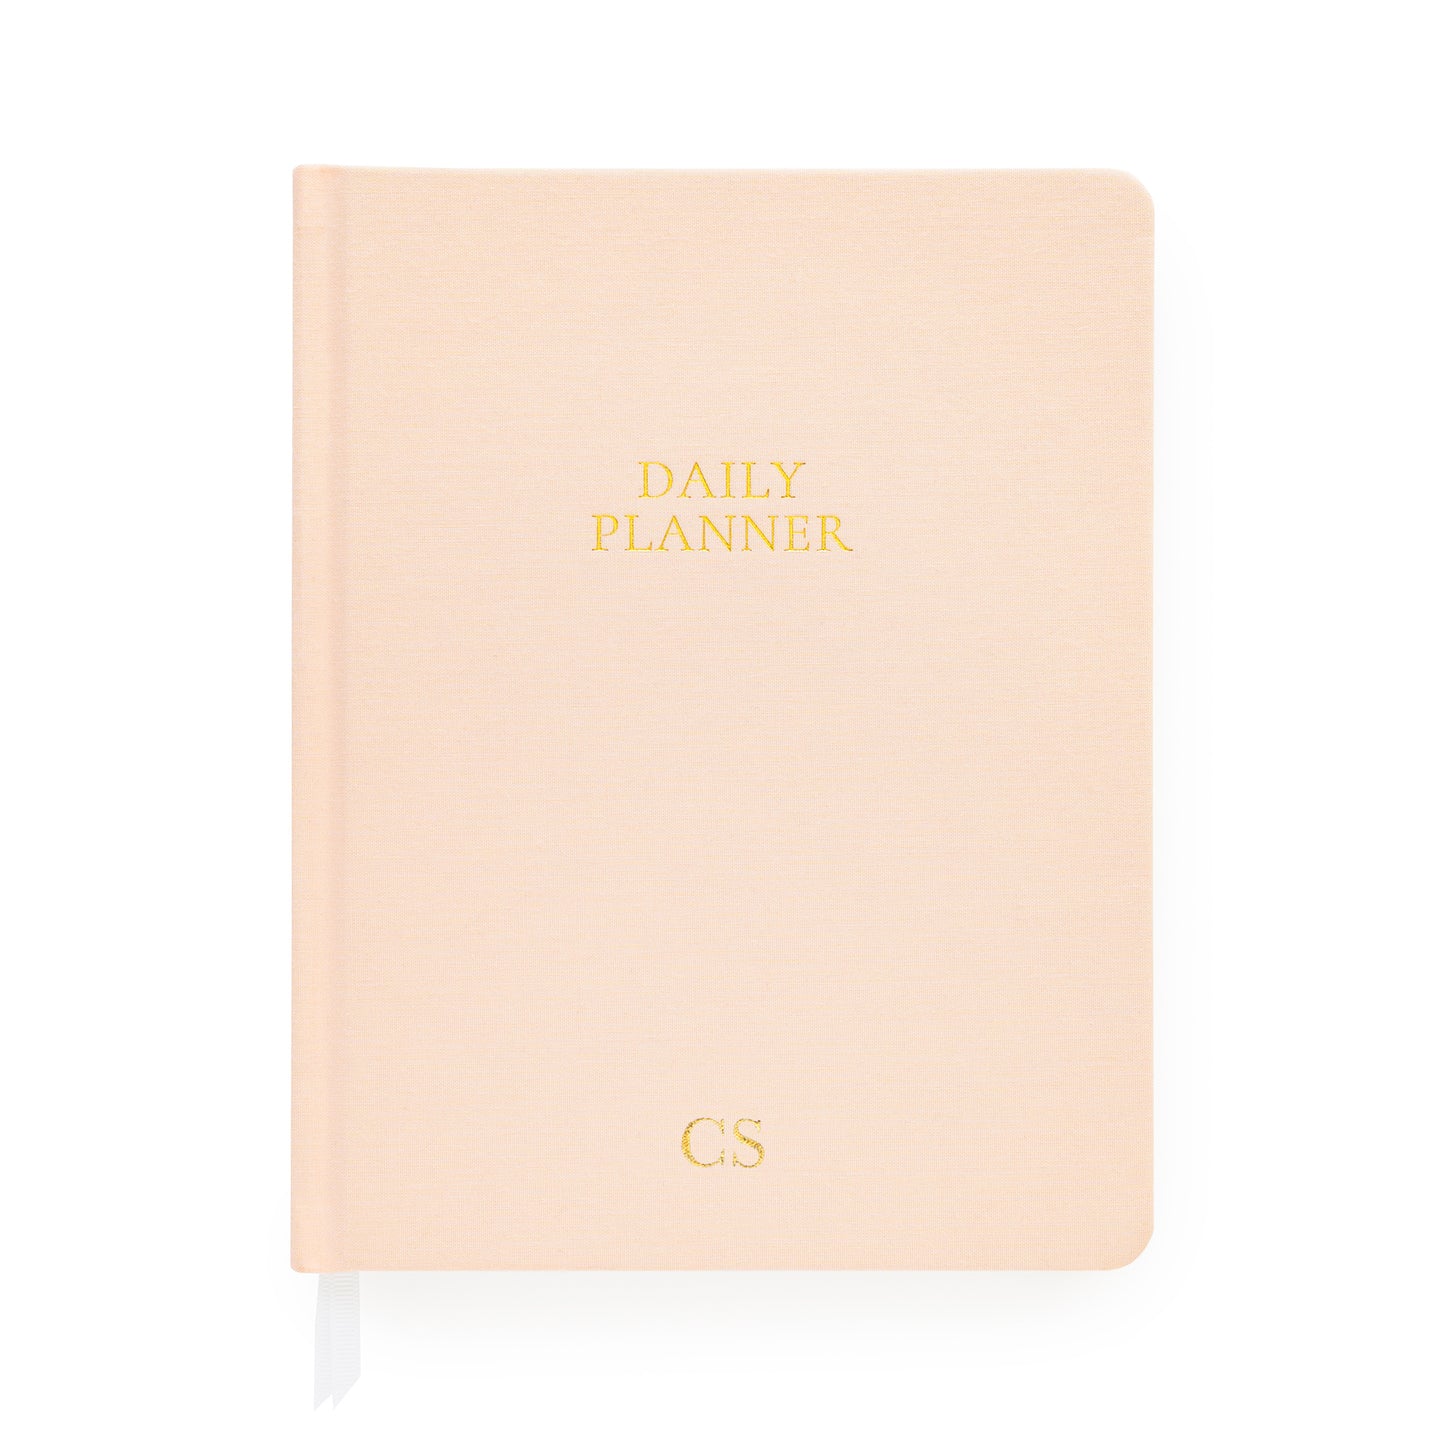 Pale pink daily planner with gold monogram initials